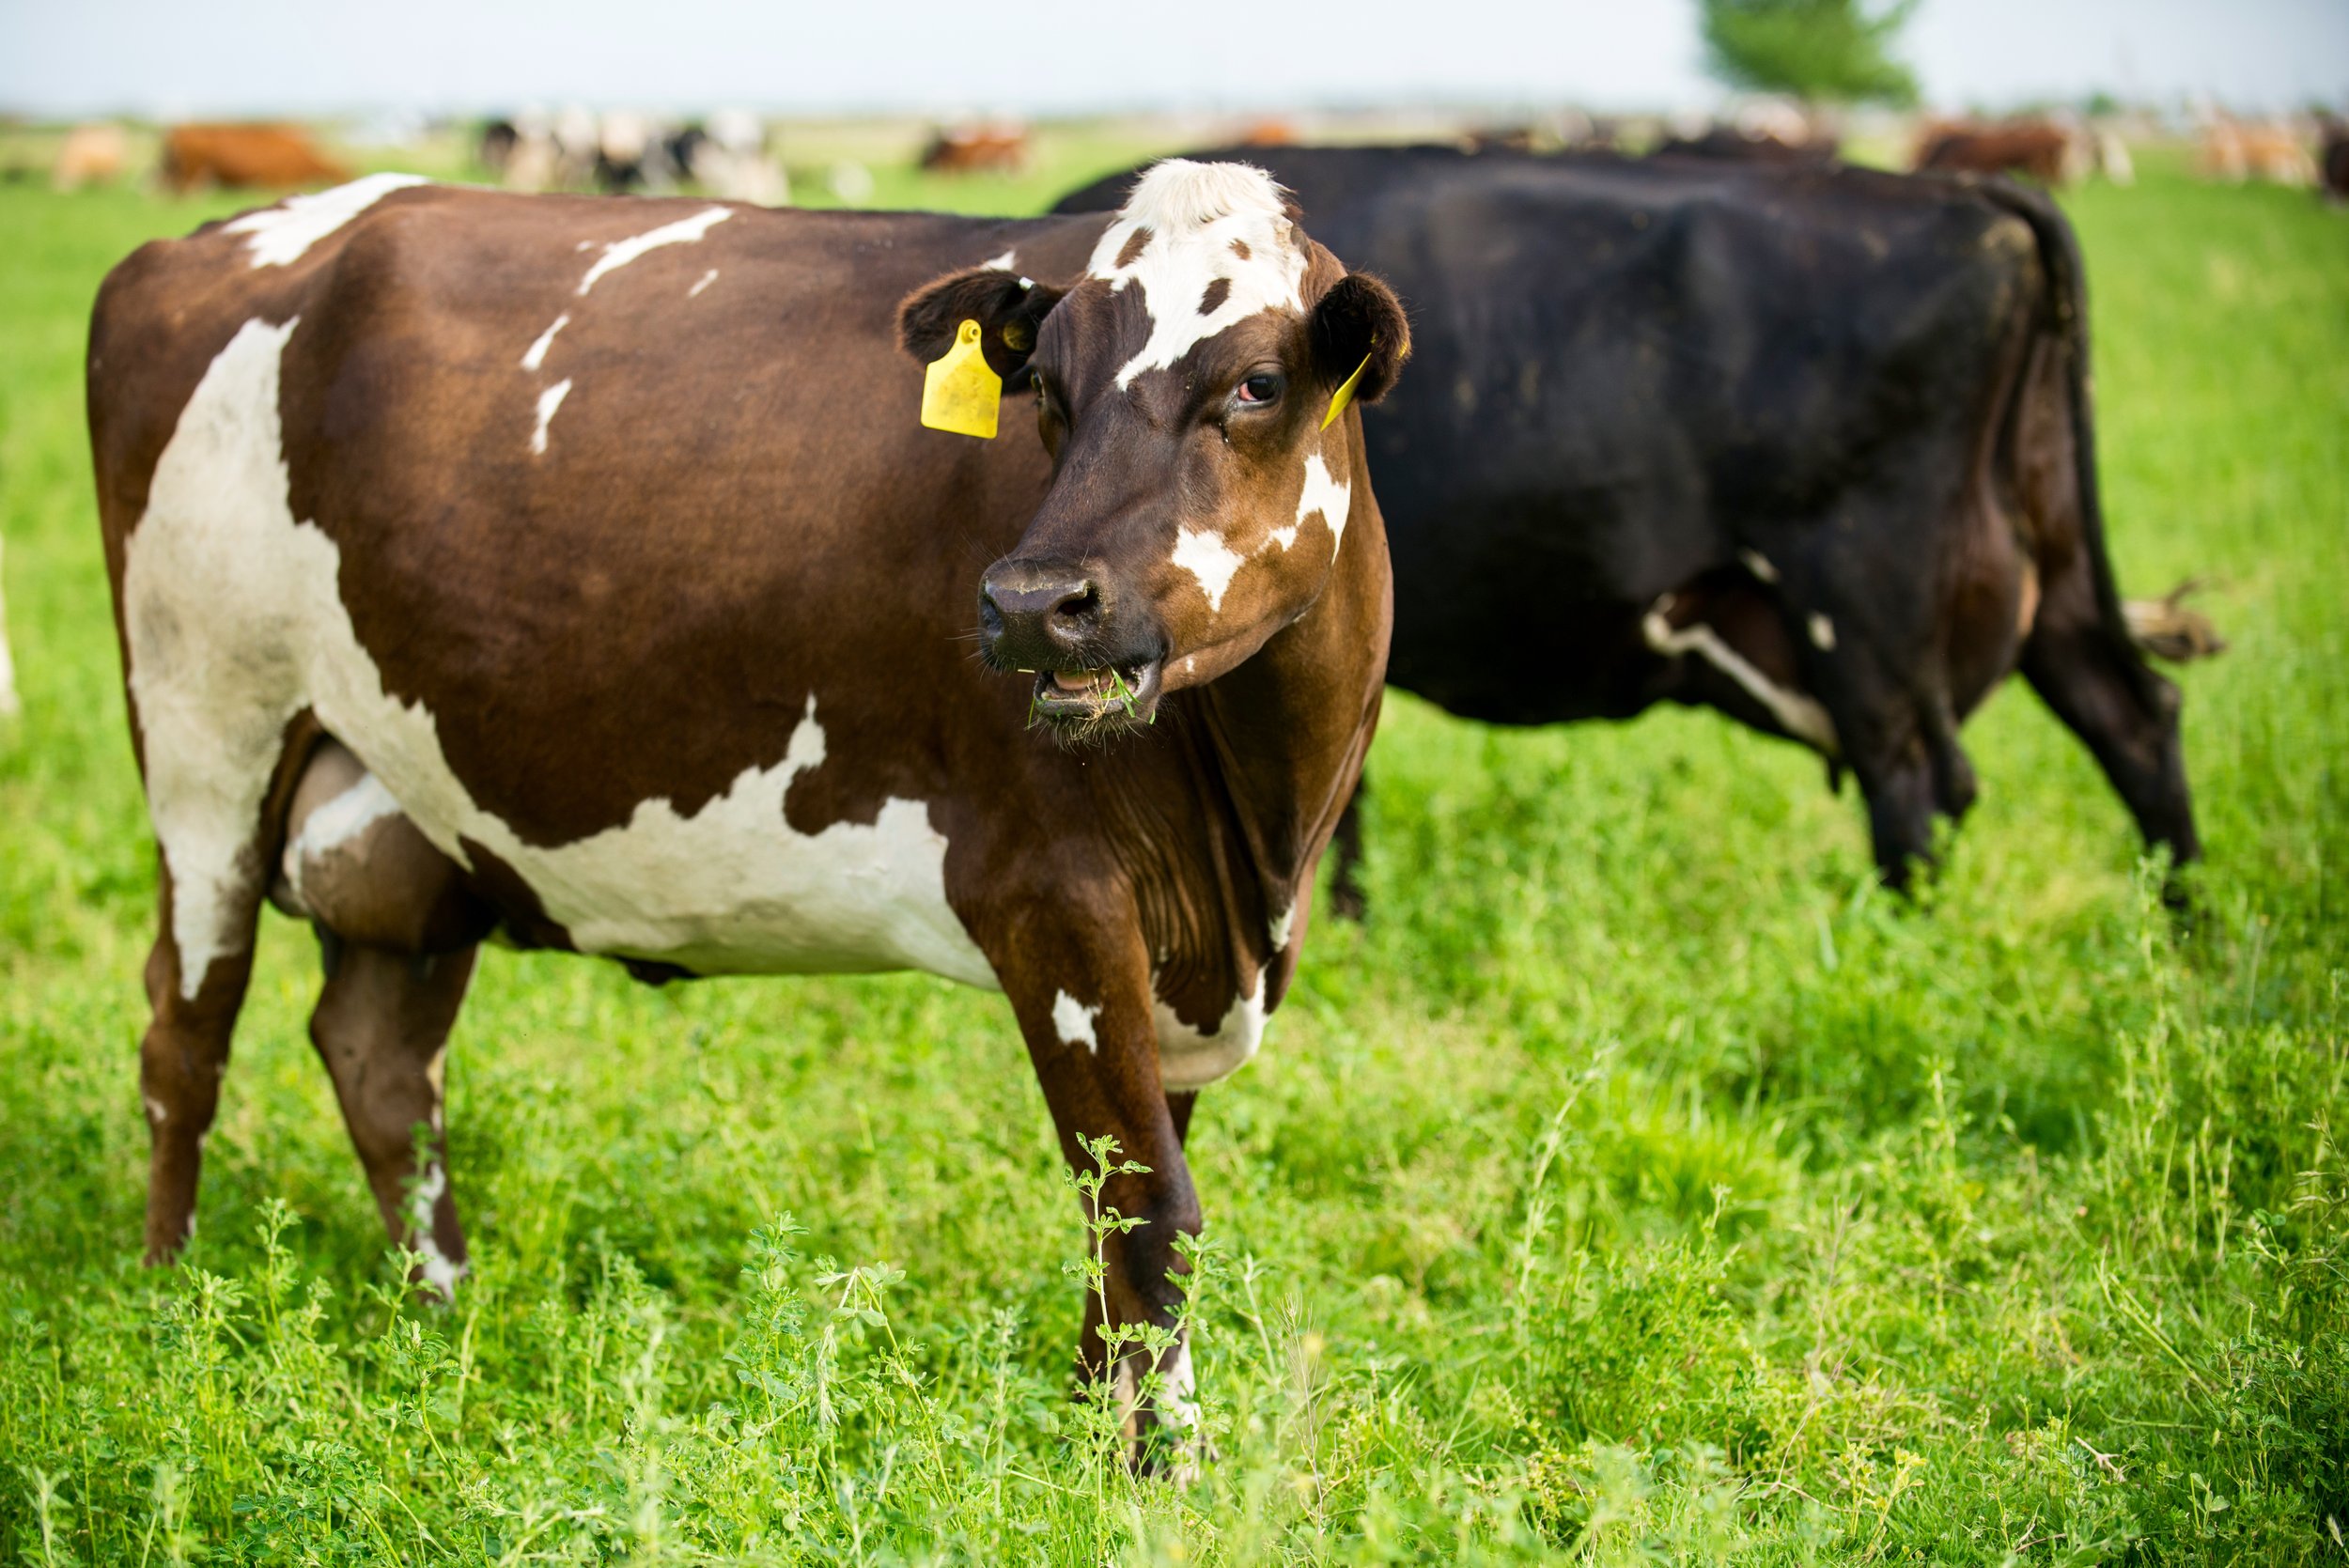 (11) FUN FACTS I BET YOU DIDN’T KNOW ABOUT COWS! — RAW FARM usa